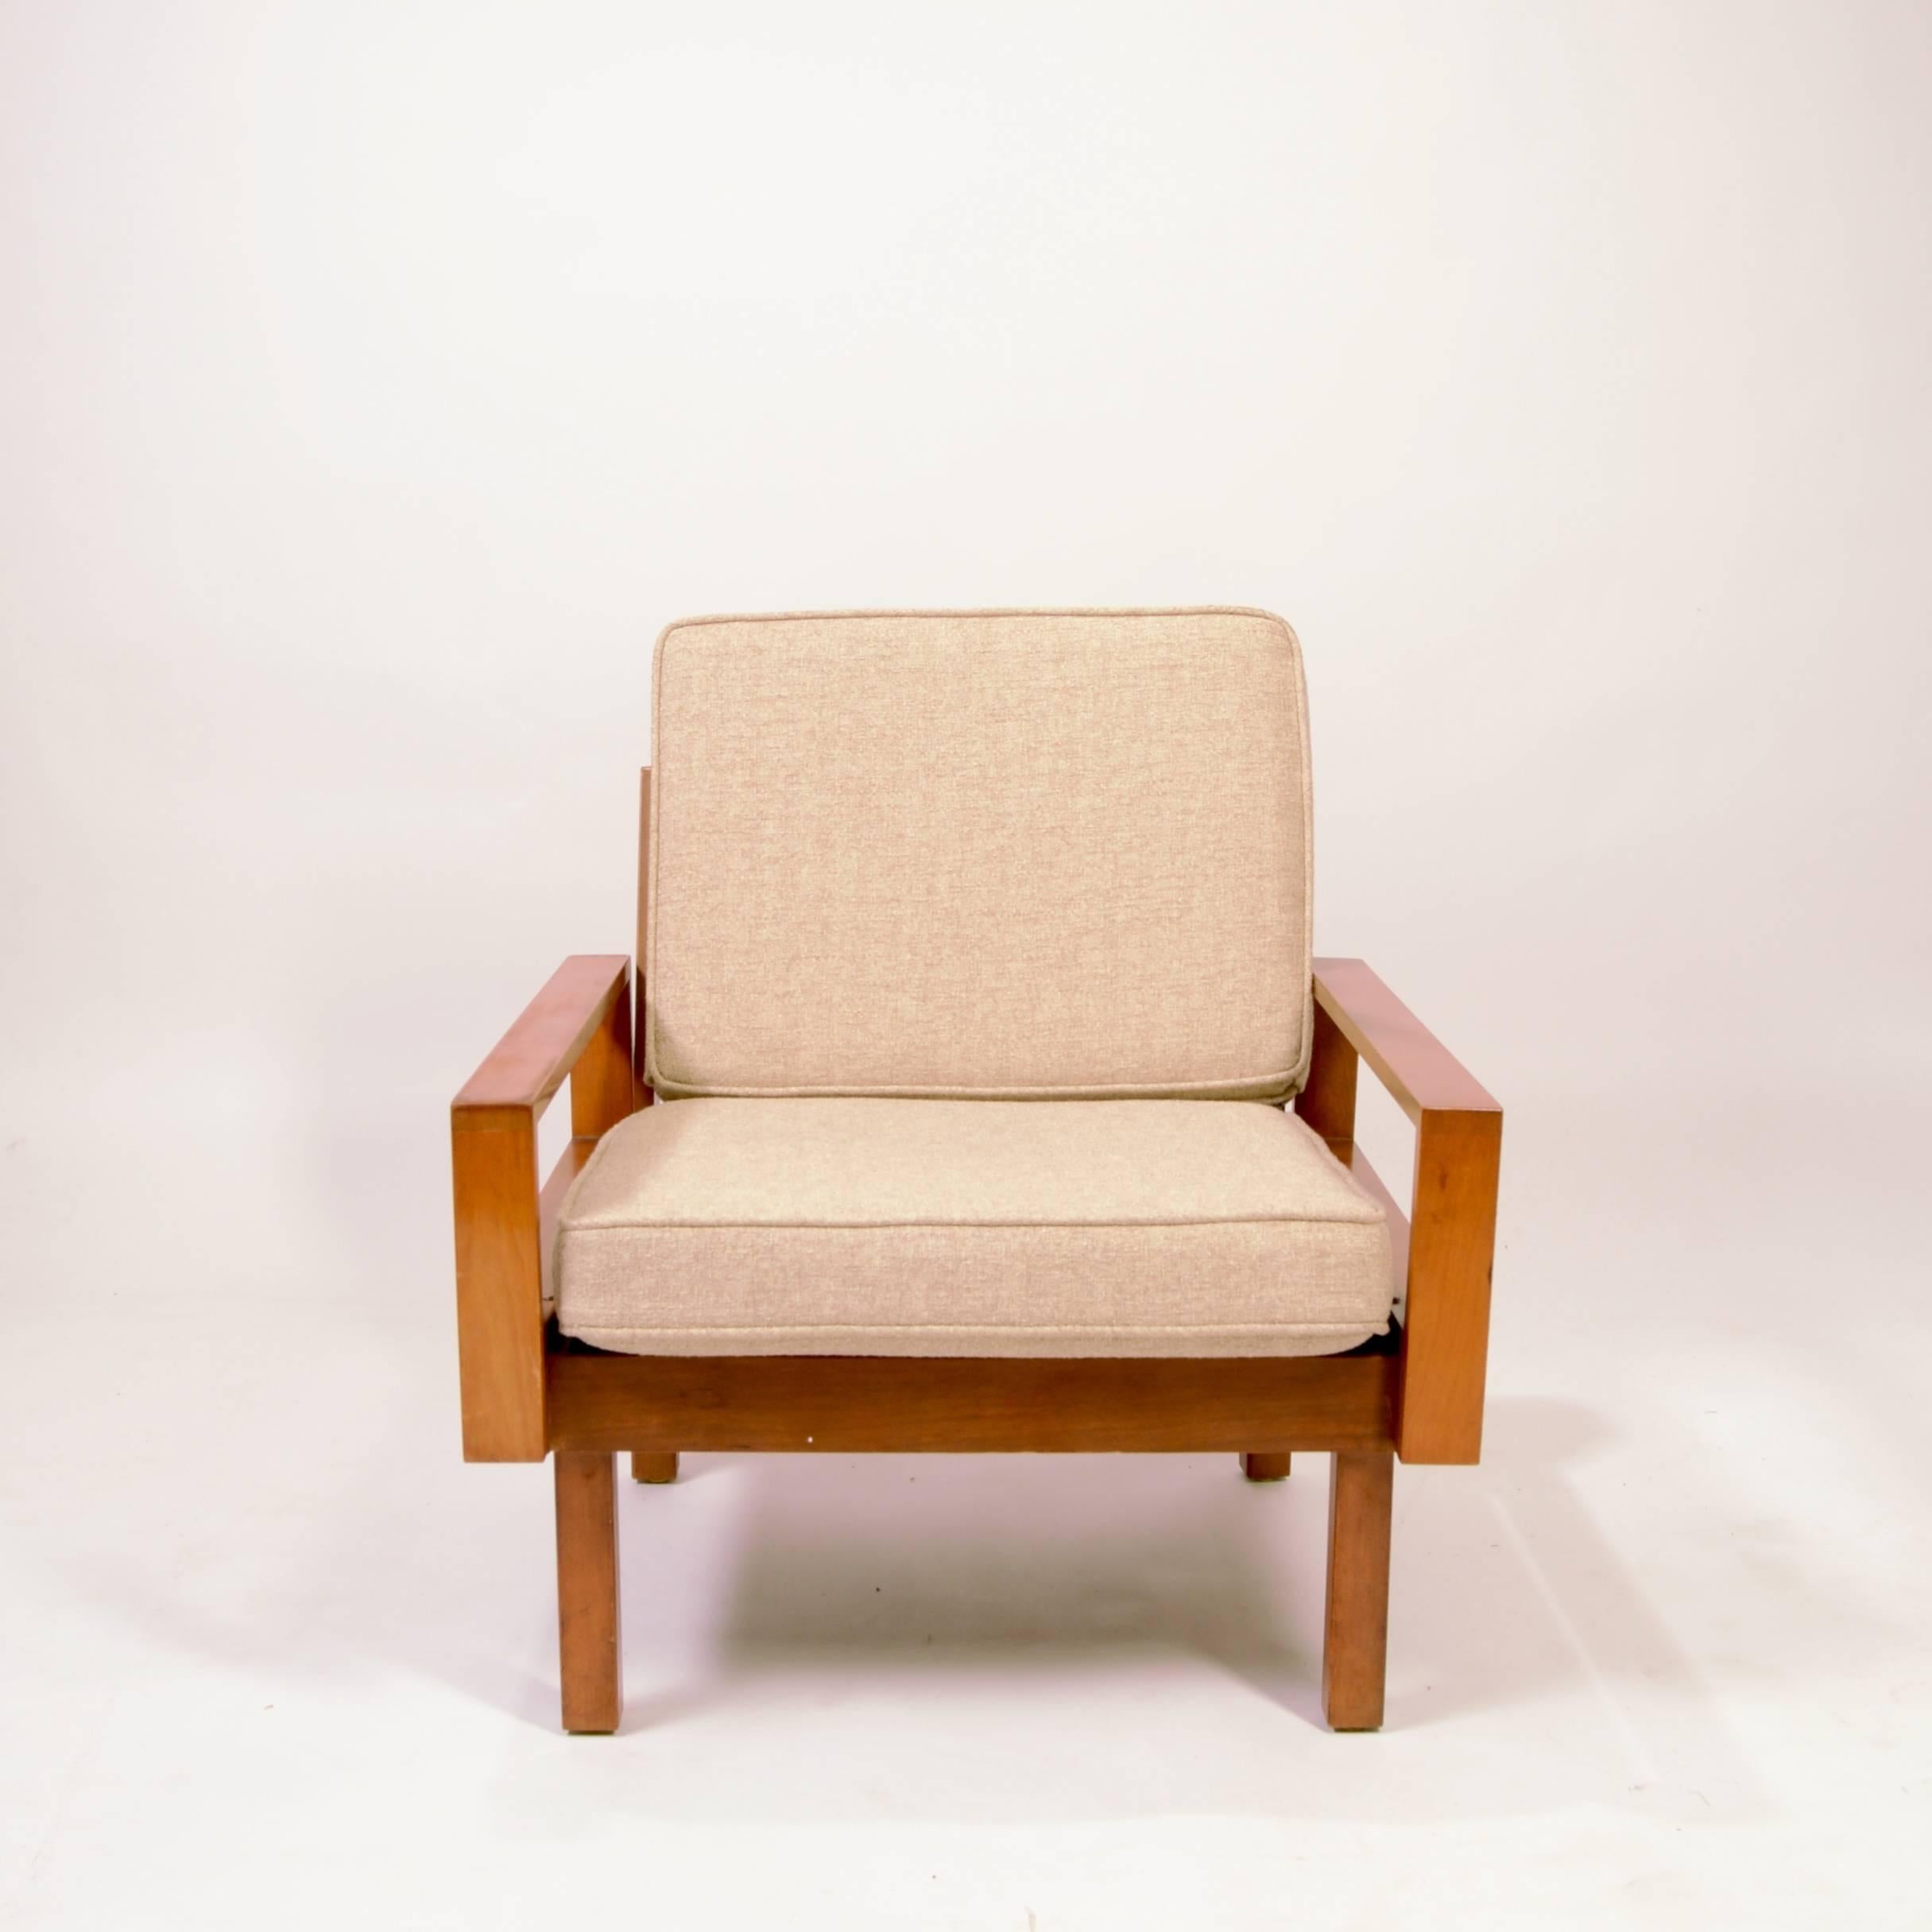 American Chair by Martin Borenstein for the Brown & Saltman Modular Living Room System